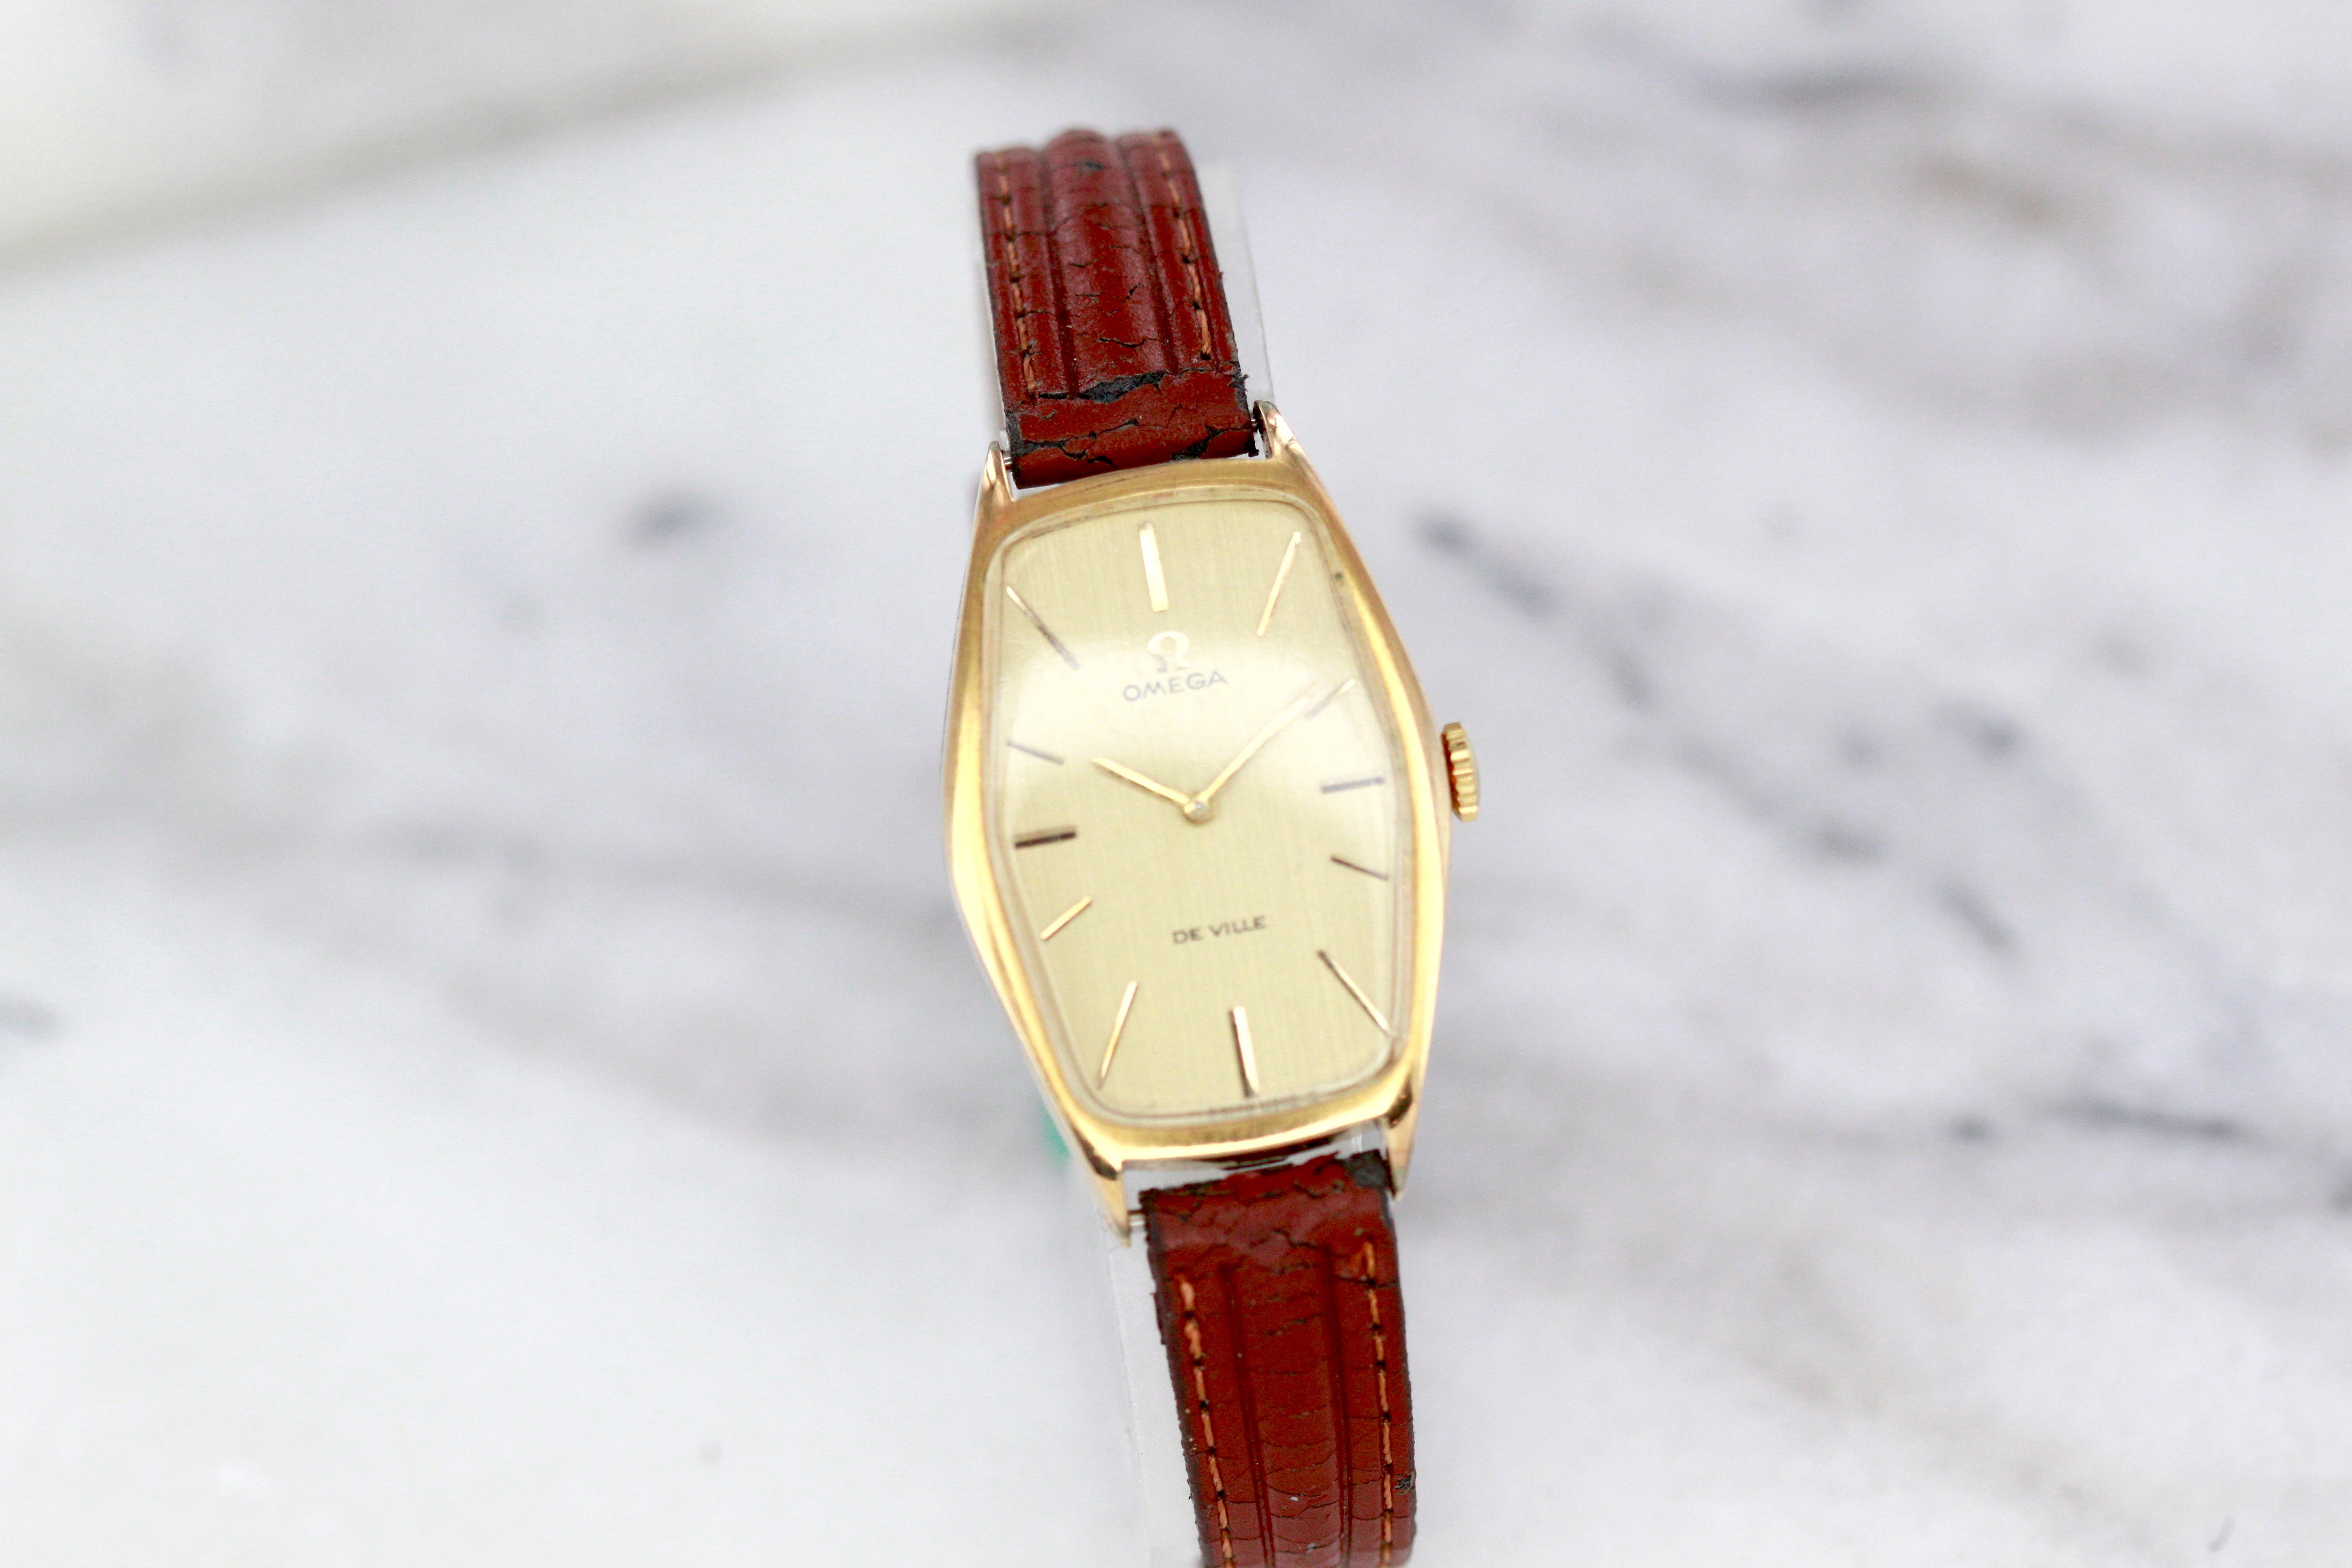 Omega lady Handwinding Gold plated watch from the 70s